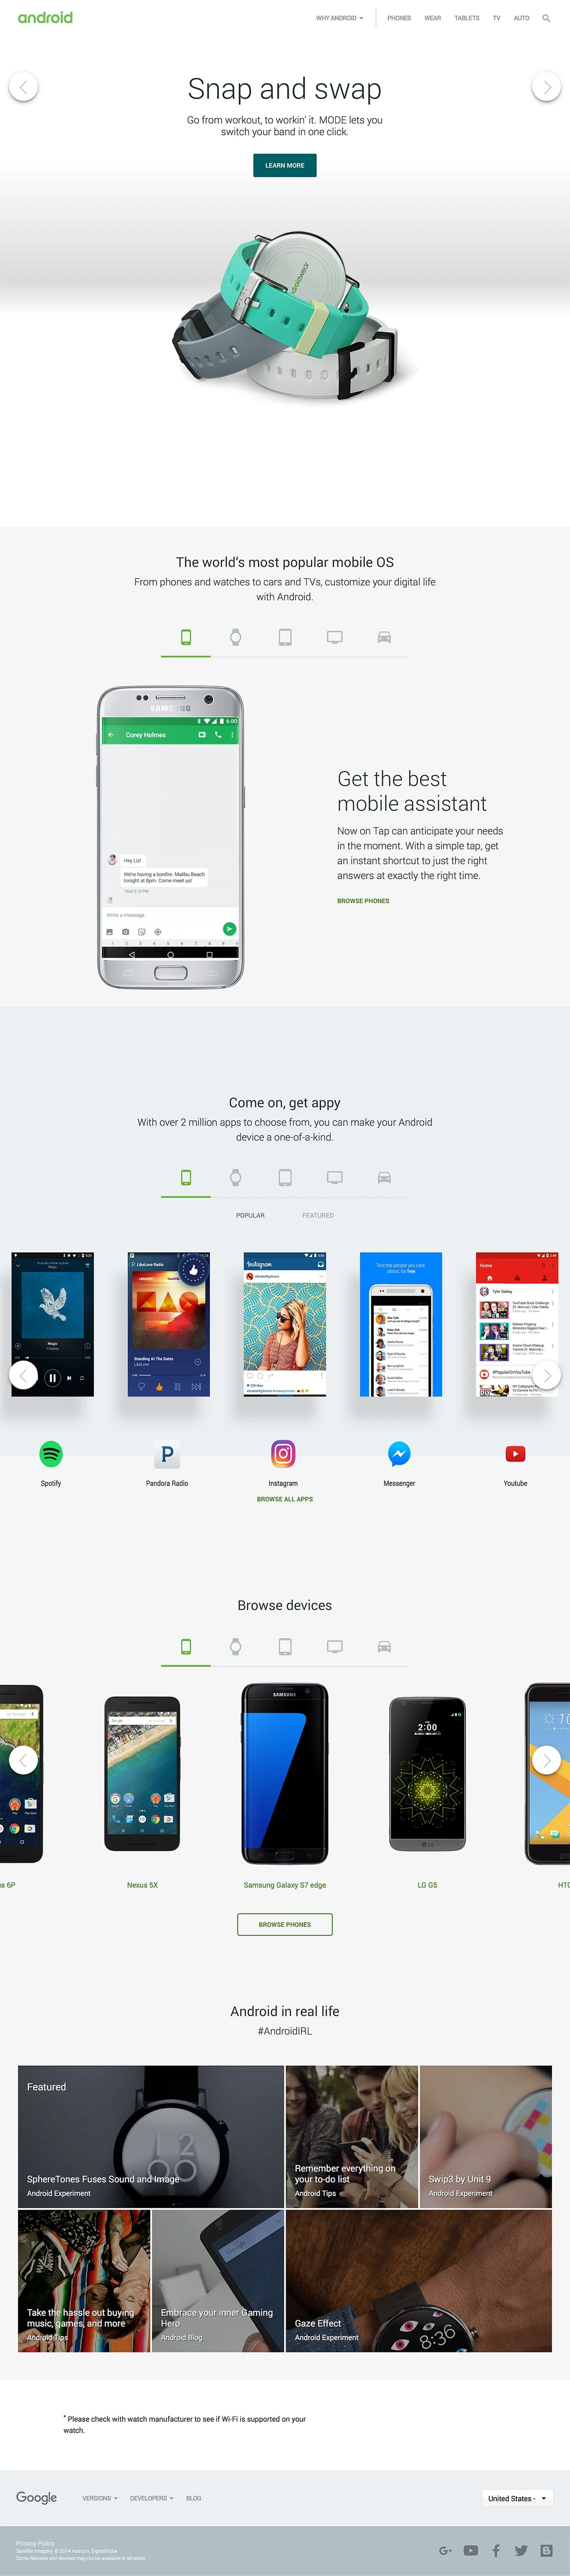 Android Landing Page Example: The world’s most popular mobile OS. From phones and watches to cars and TVs, customize your digital life with Android.